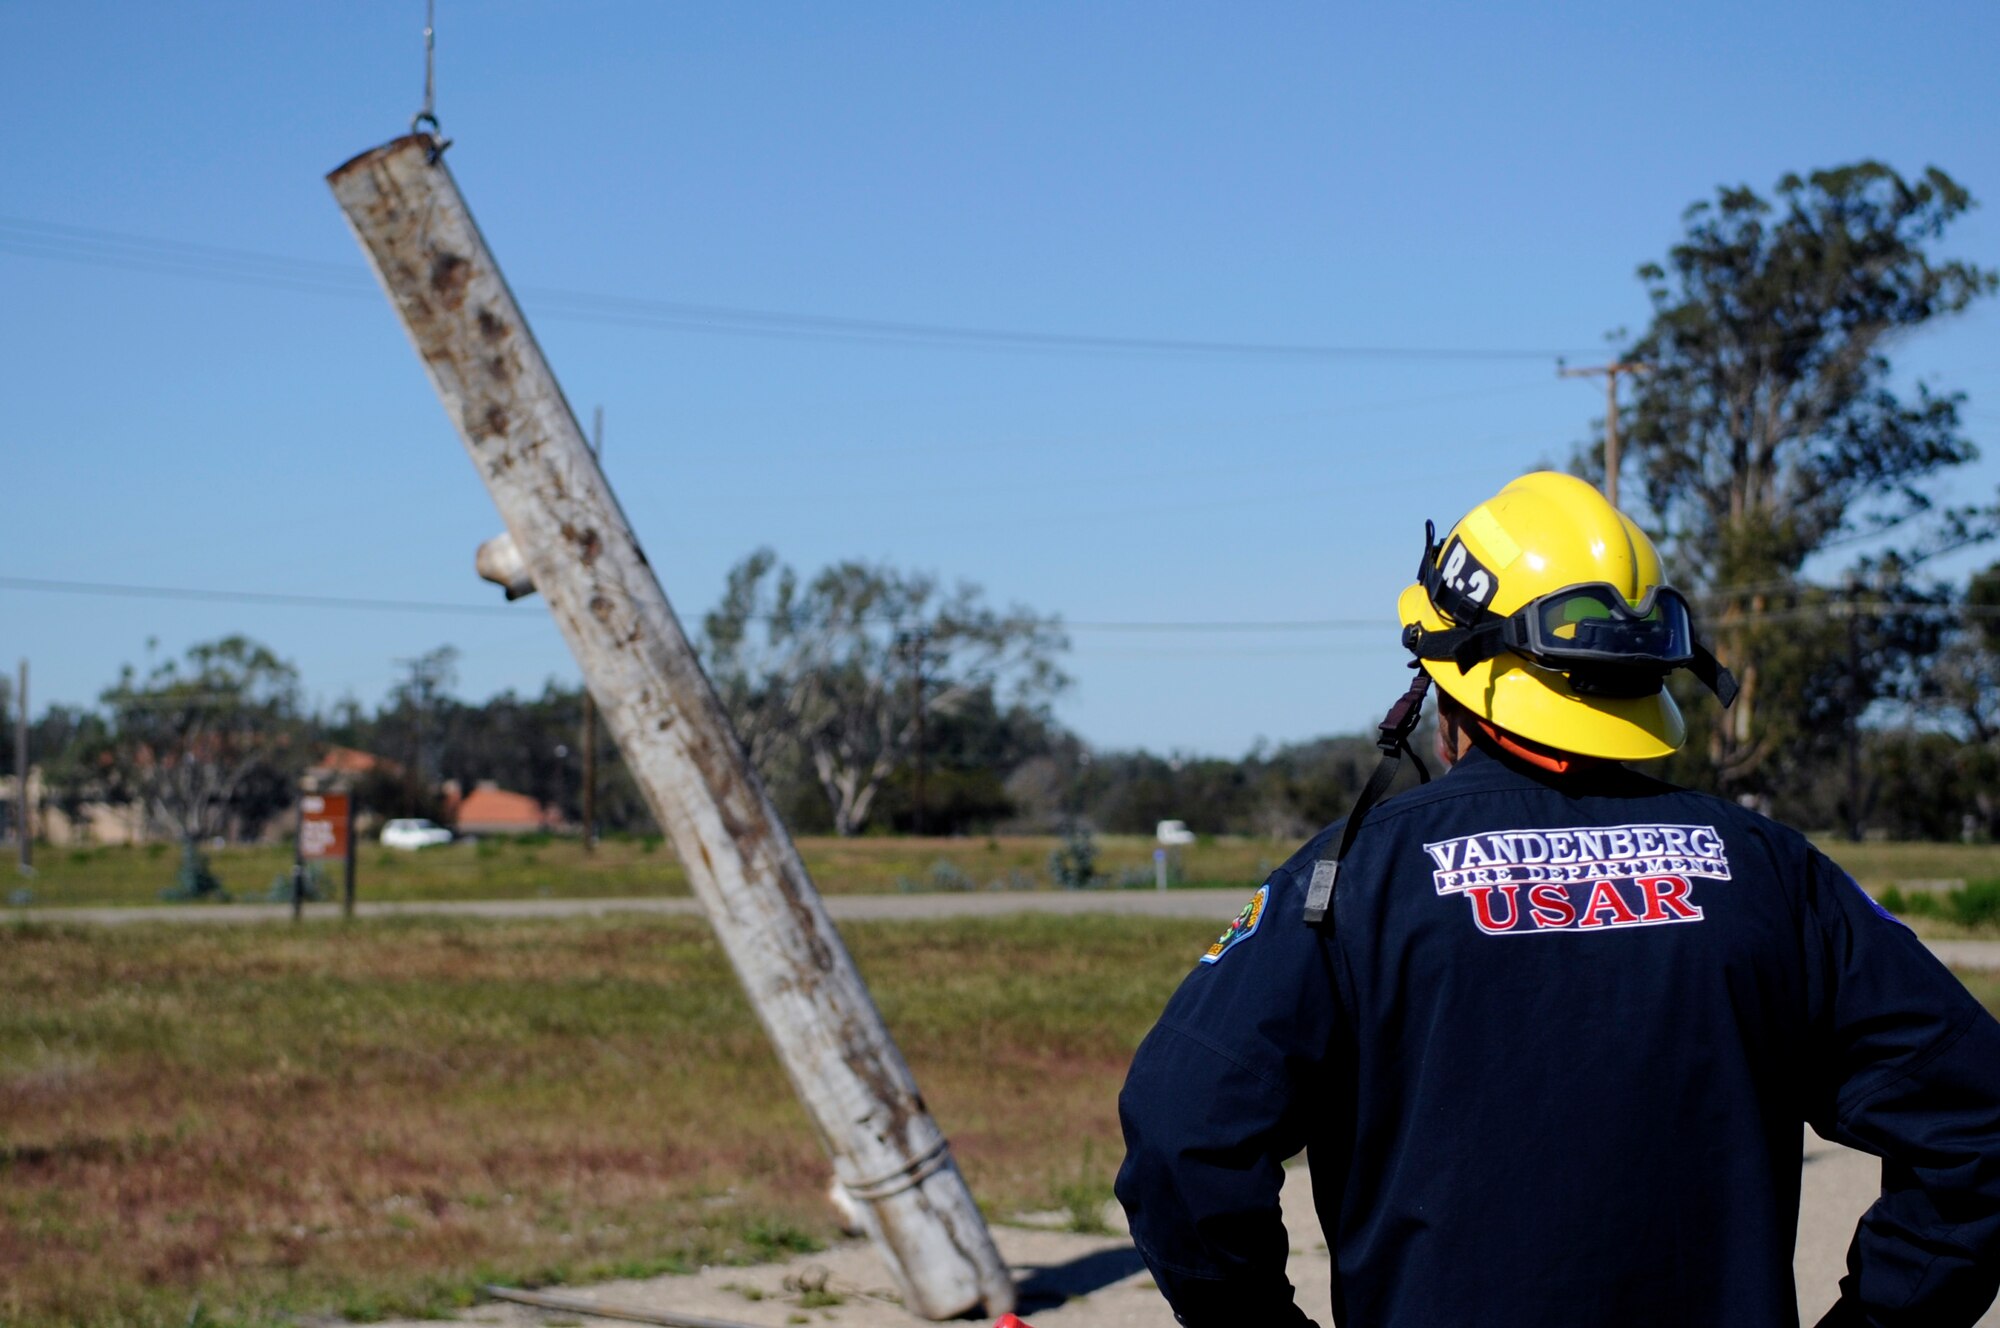 Robert McCoy, 30th Civil Engineer Squadron firefighter, observes proper crane operations during Heavy Equipment and Rigging Specialist training, March 12, 2015, Vandenberg Air Force Base, Calif. The training covered the use of heavy equipment in the event of an earthquake structural collapse scenario. (U.S. Air Force photo by Senior Airman Shane Phipps/Released)